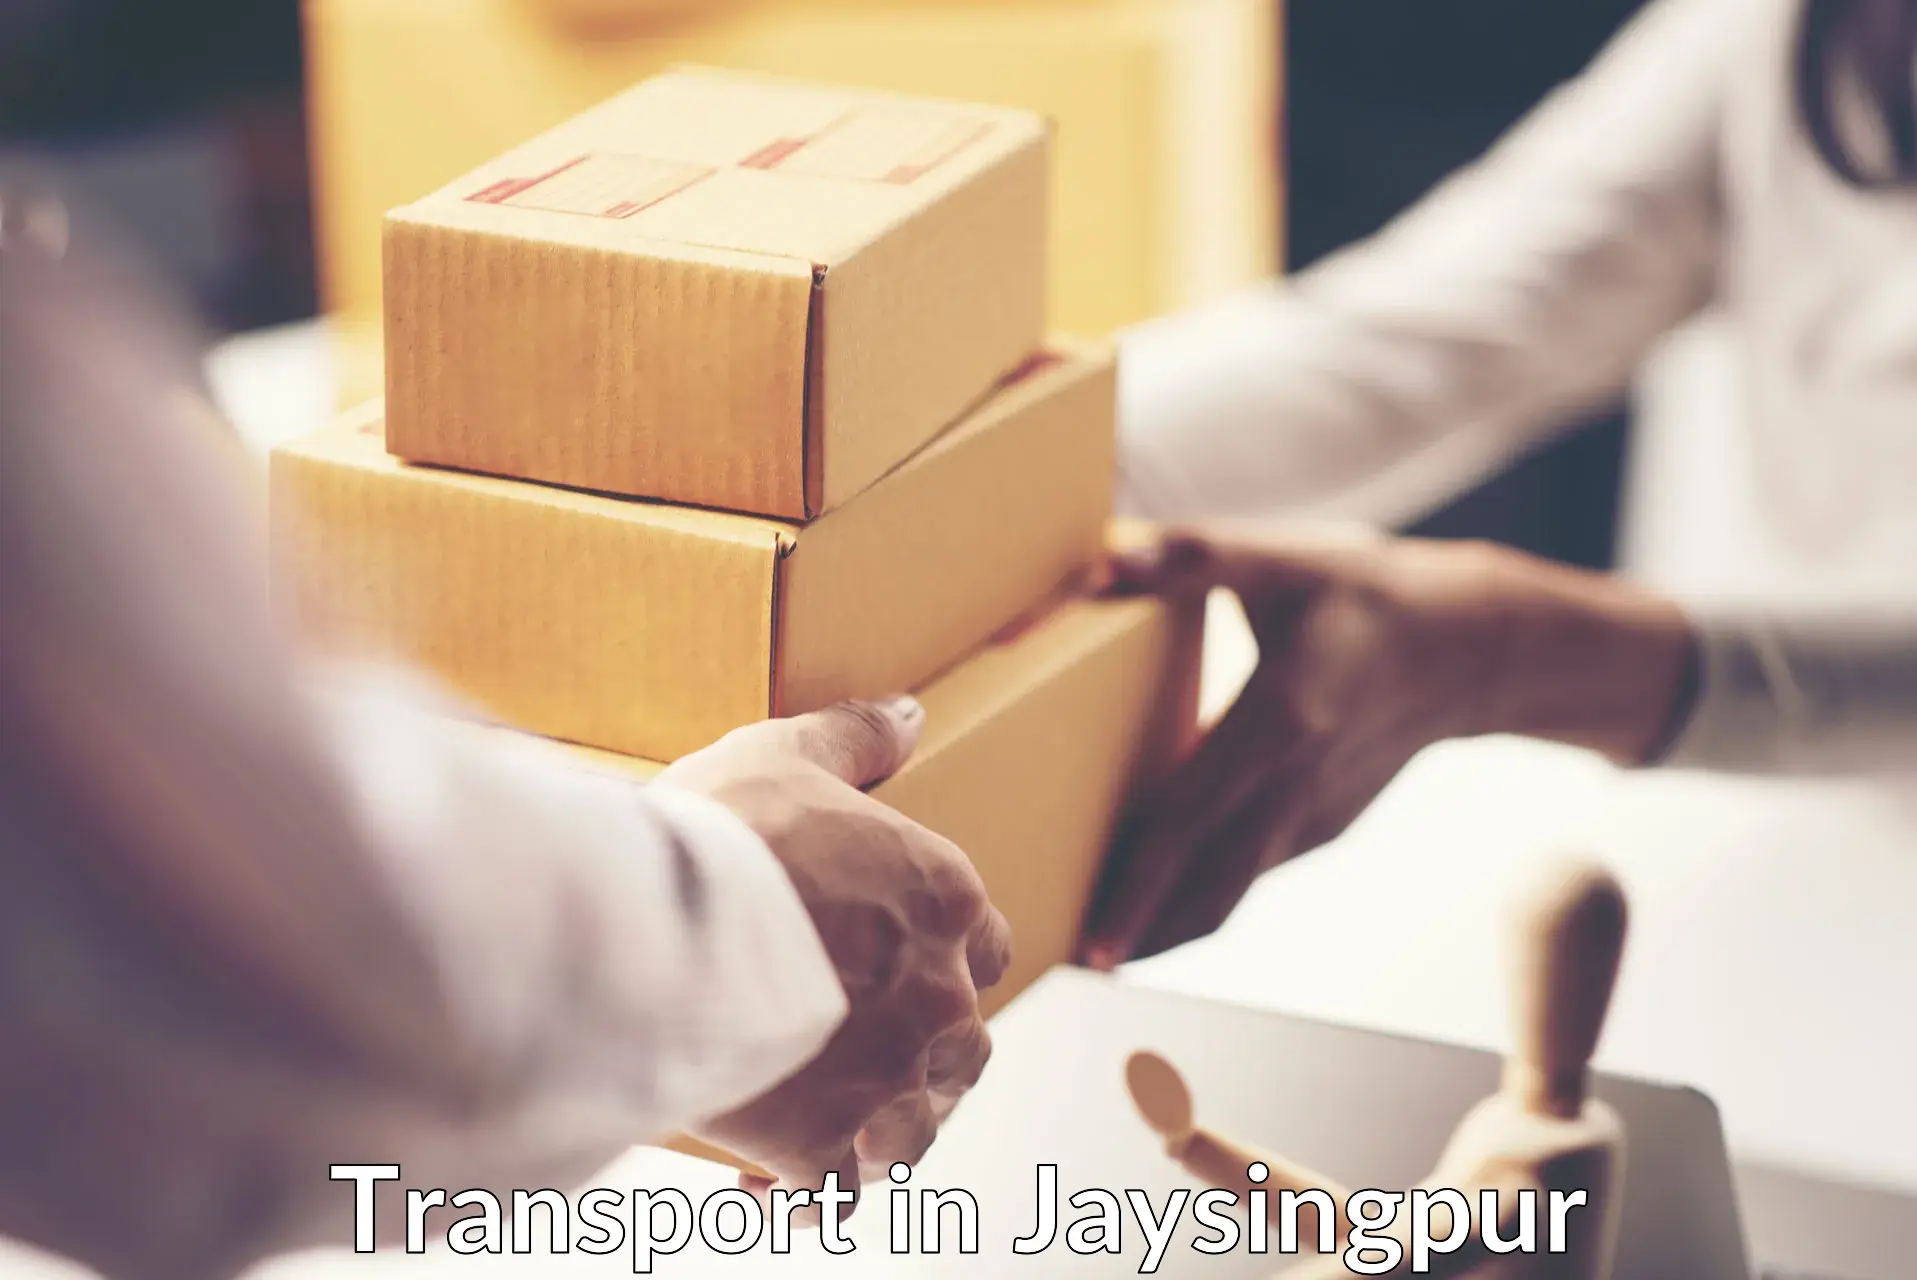 Container transport service in Jaysingpur